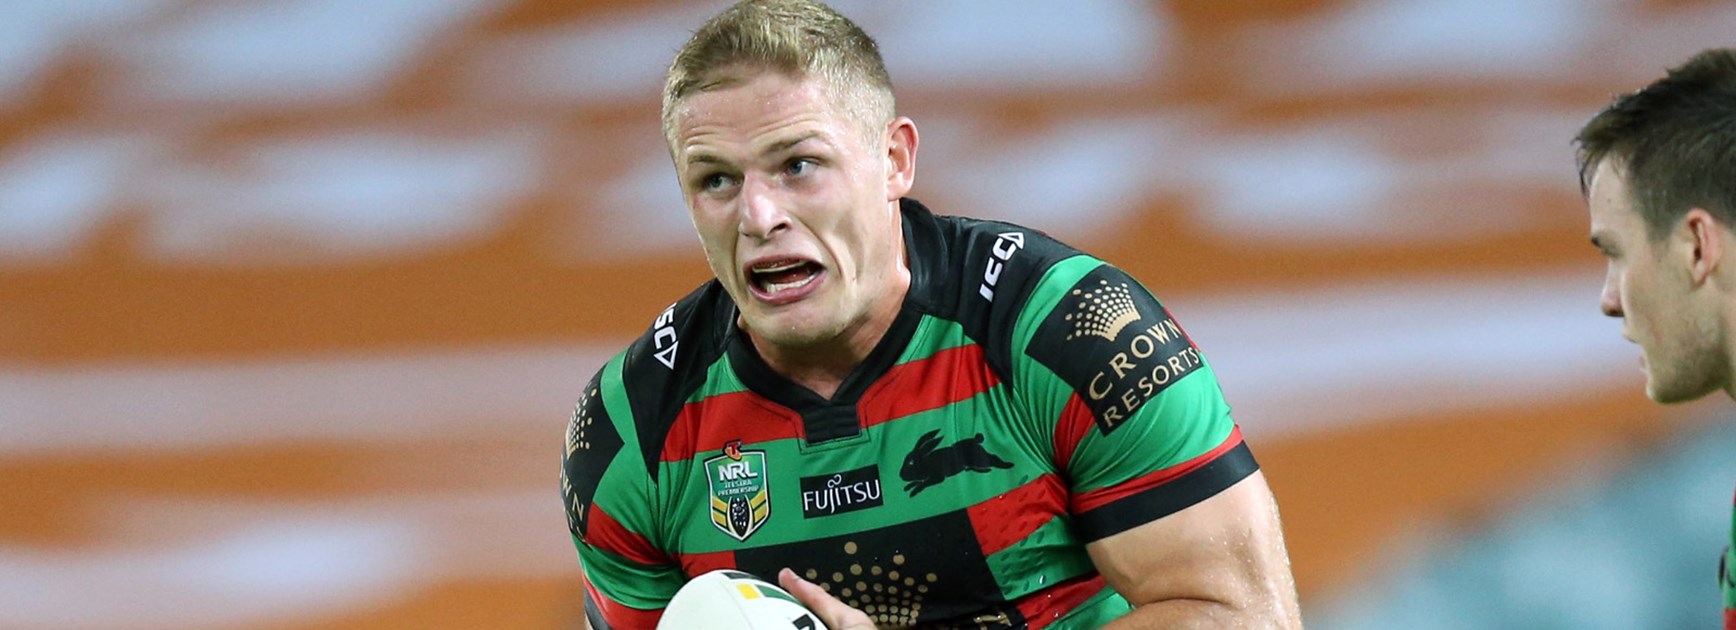 Rabbitohs prop George Burgess charges forward against Wests Tigers.